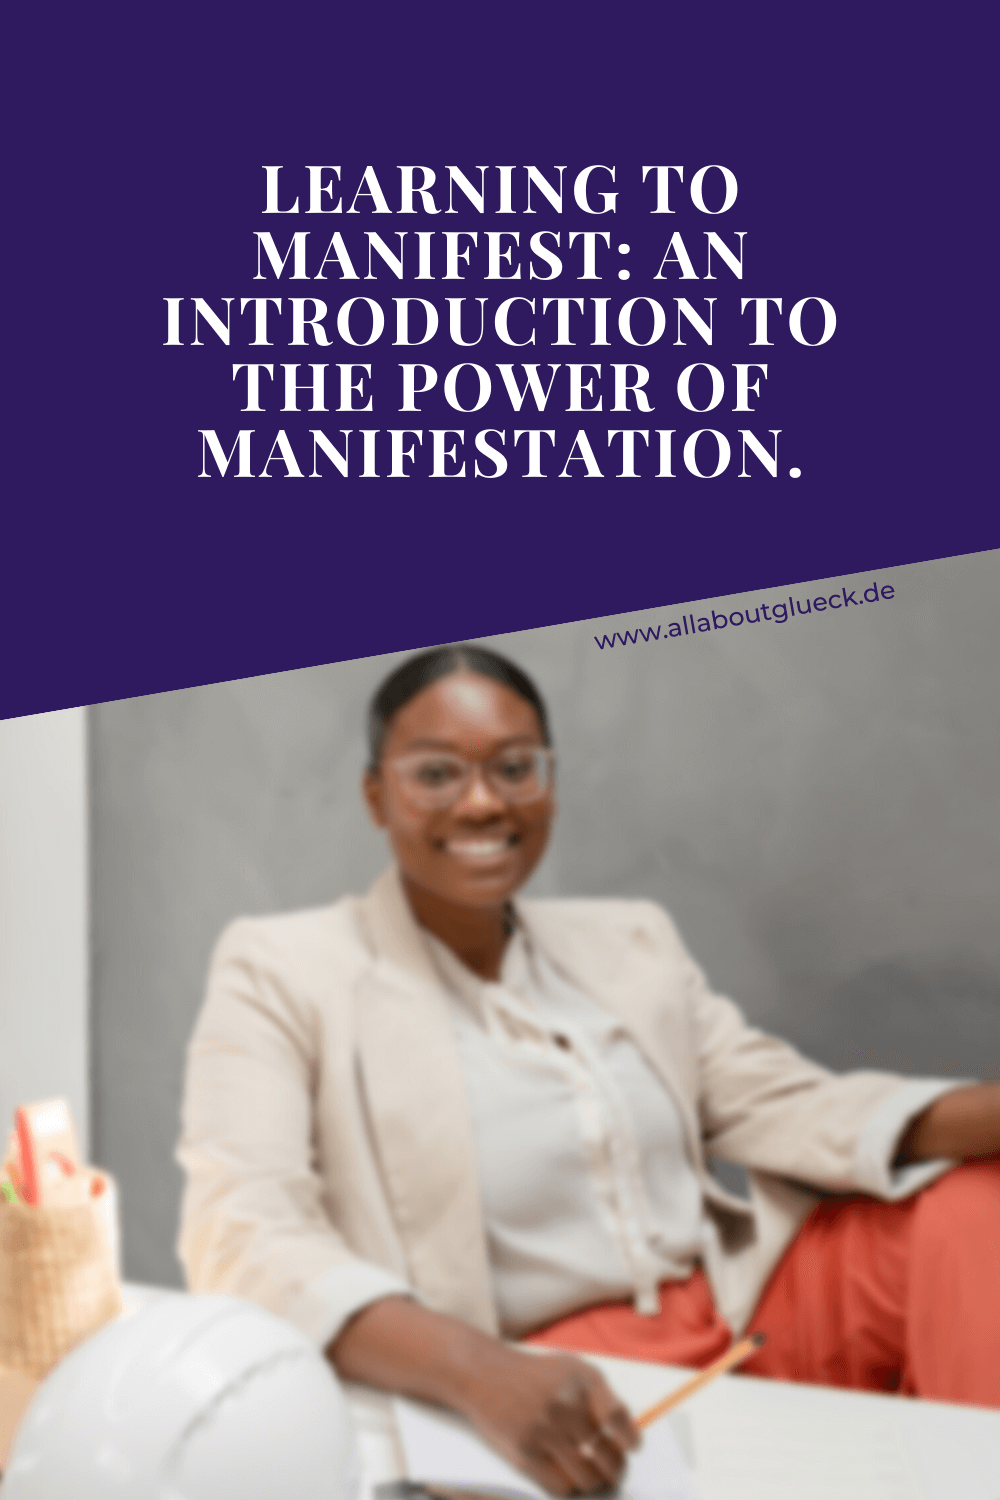 Learning to Manifest: An Introduction to the Power of Manifestation.